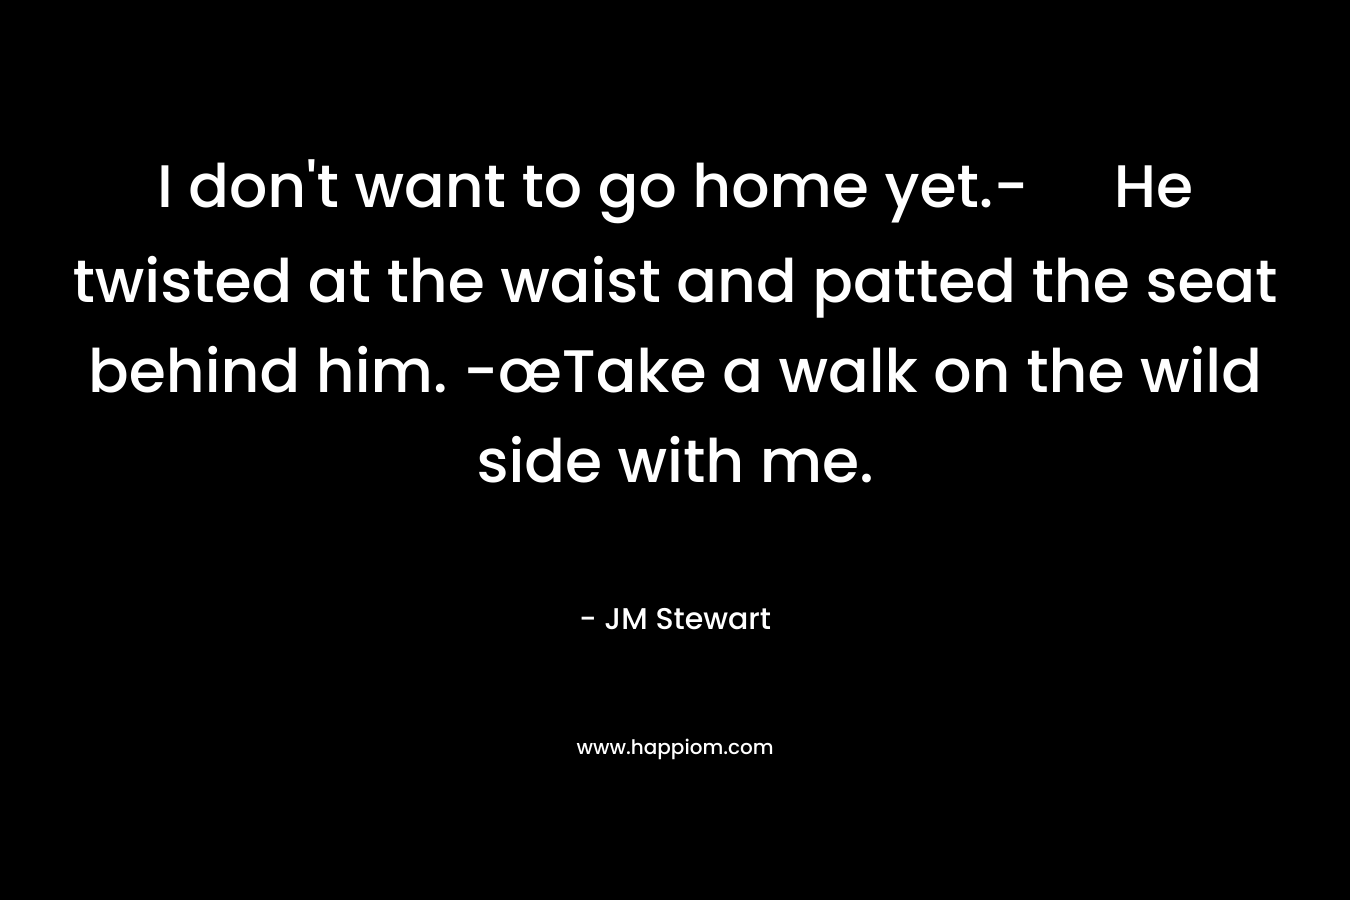 I don’t want to go home yet.- He twisted at the waist and patted the seat behind him. -œTake a walk on the wild side with me. – JM Stewart